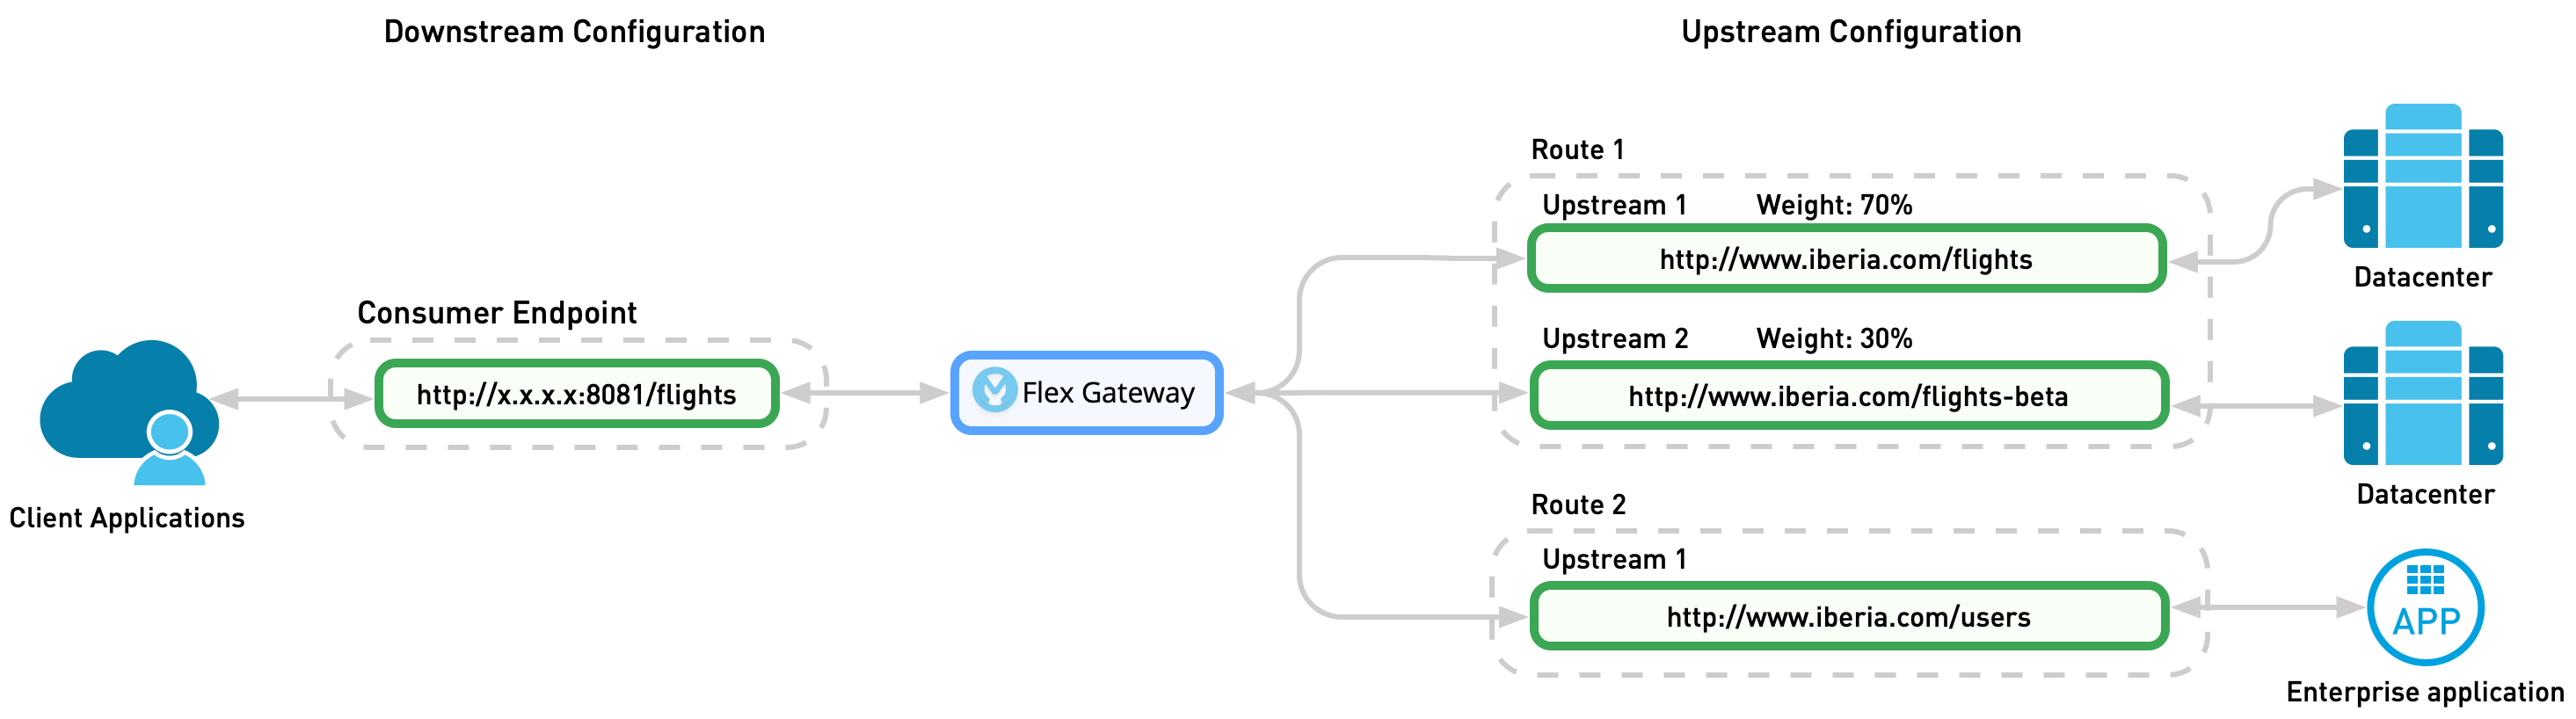 Flex Gateway manages the traffic to multiple upstreams